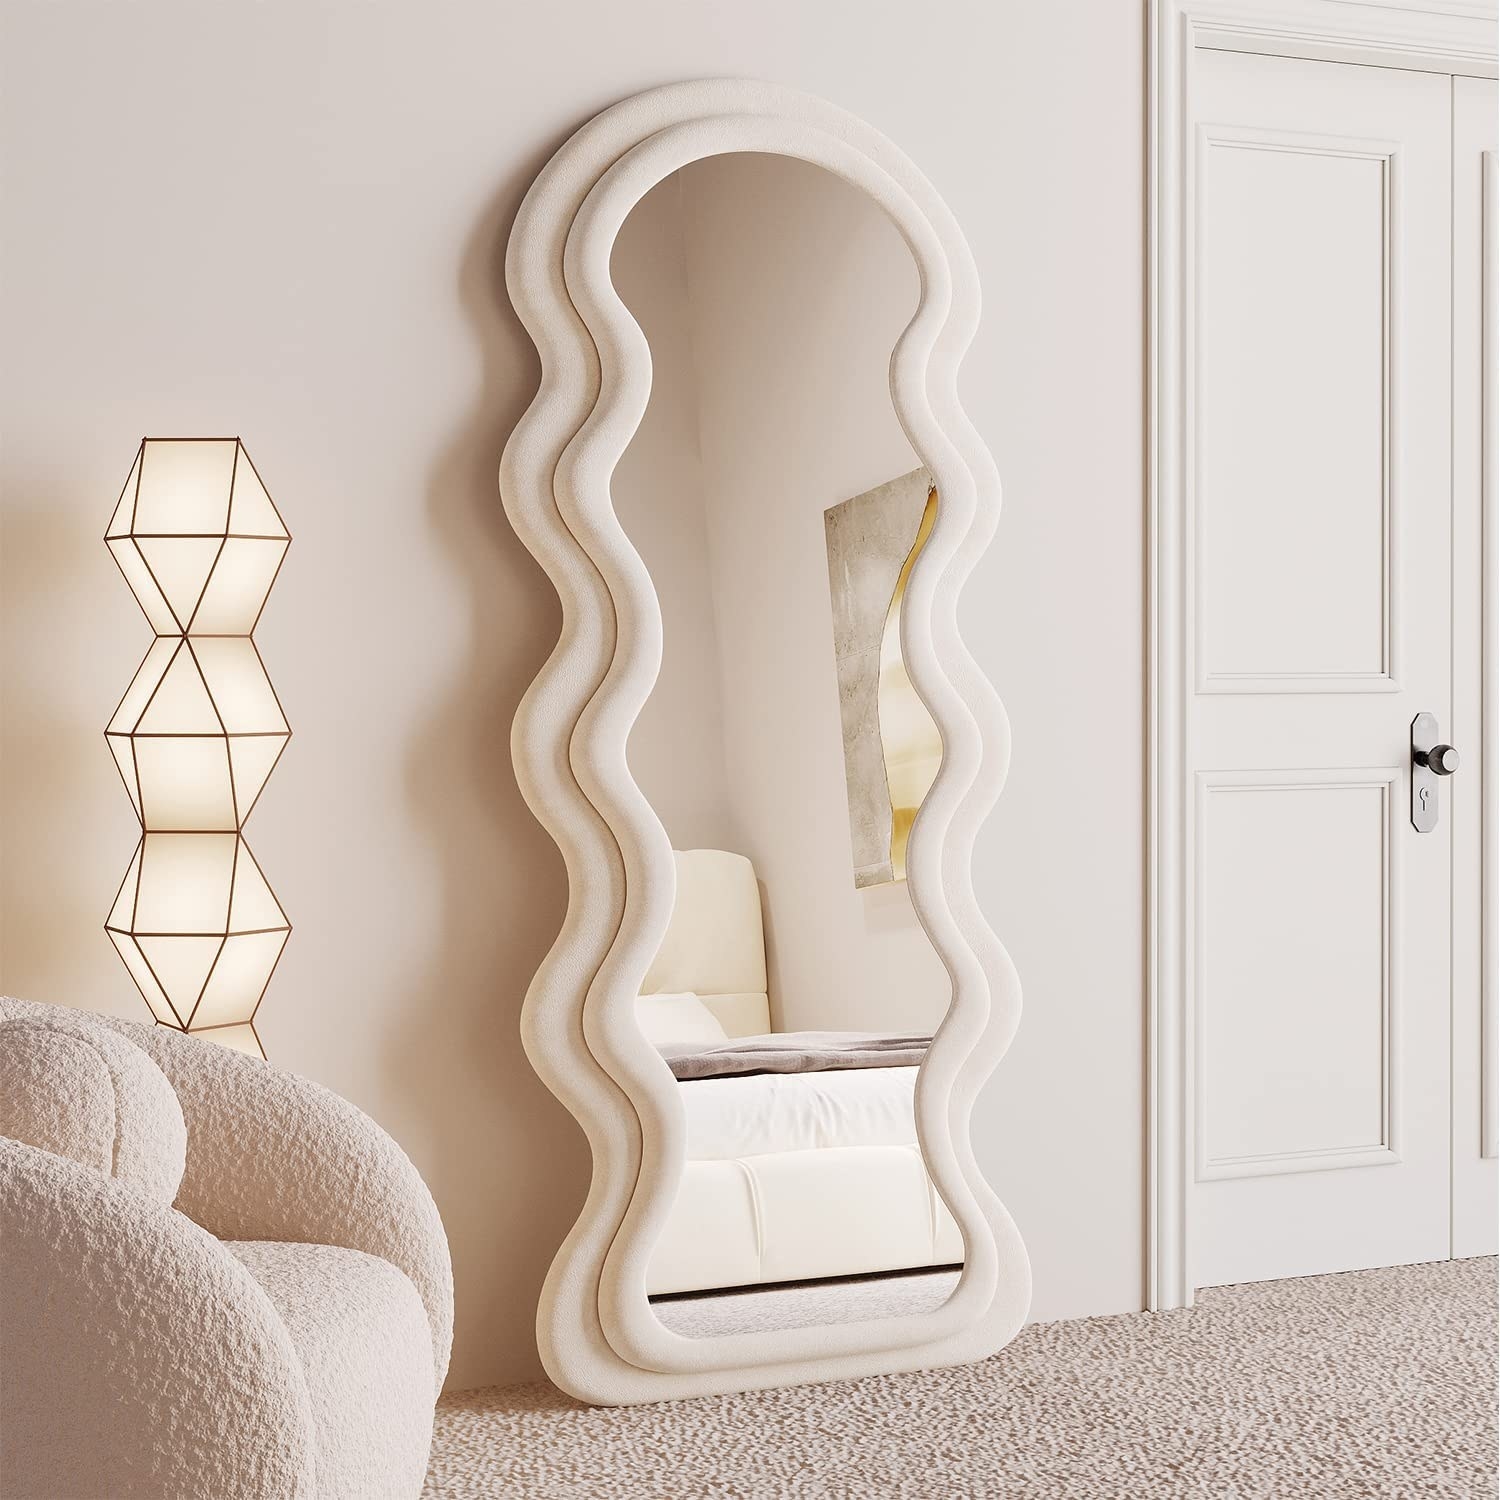 The wavy mirror is shown leaning against a wall